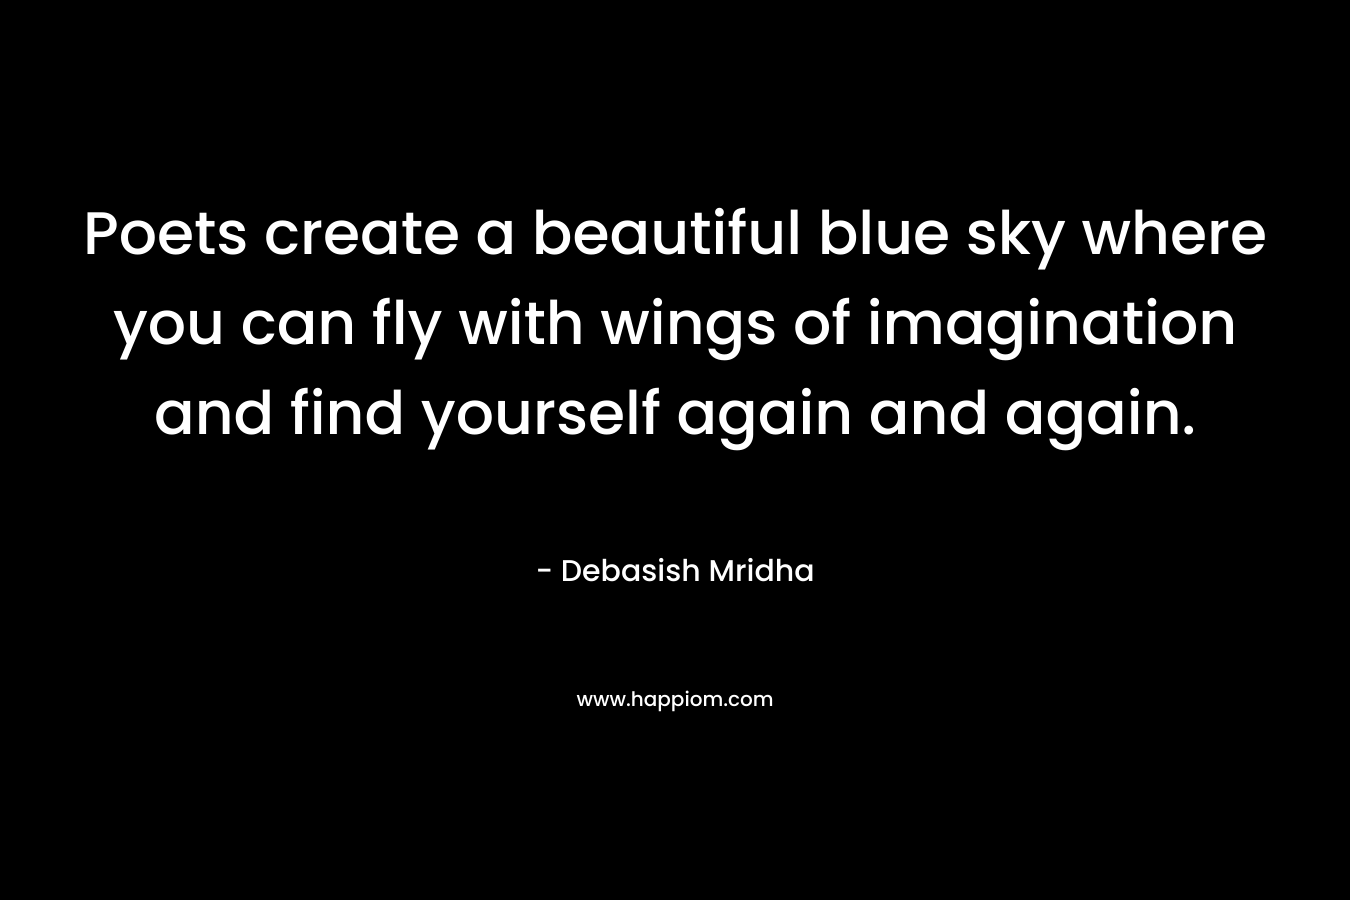 Poets create a beautiful blue sky where you can fly with wings of imagination and find yourself again and again.